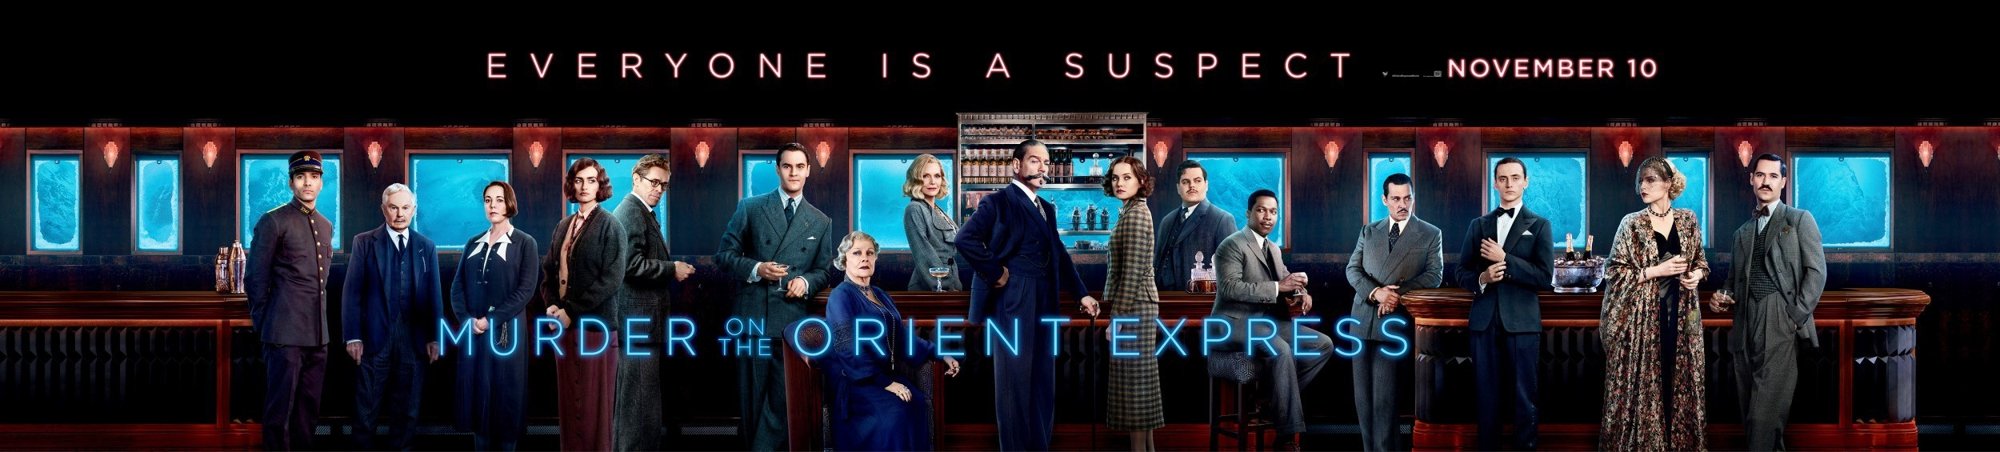 Poster of 20th Century Fox's Murder on the Orient Express (2017)